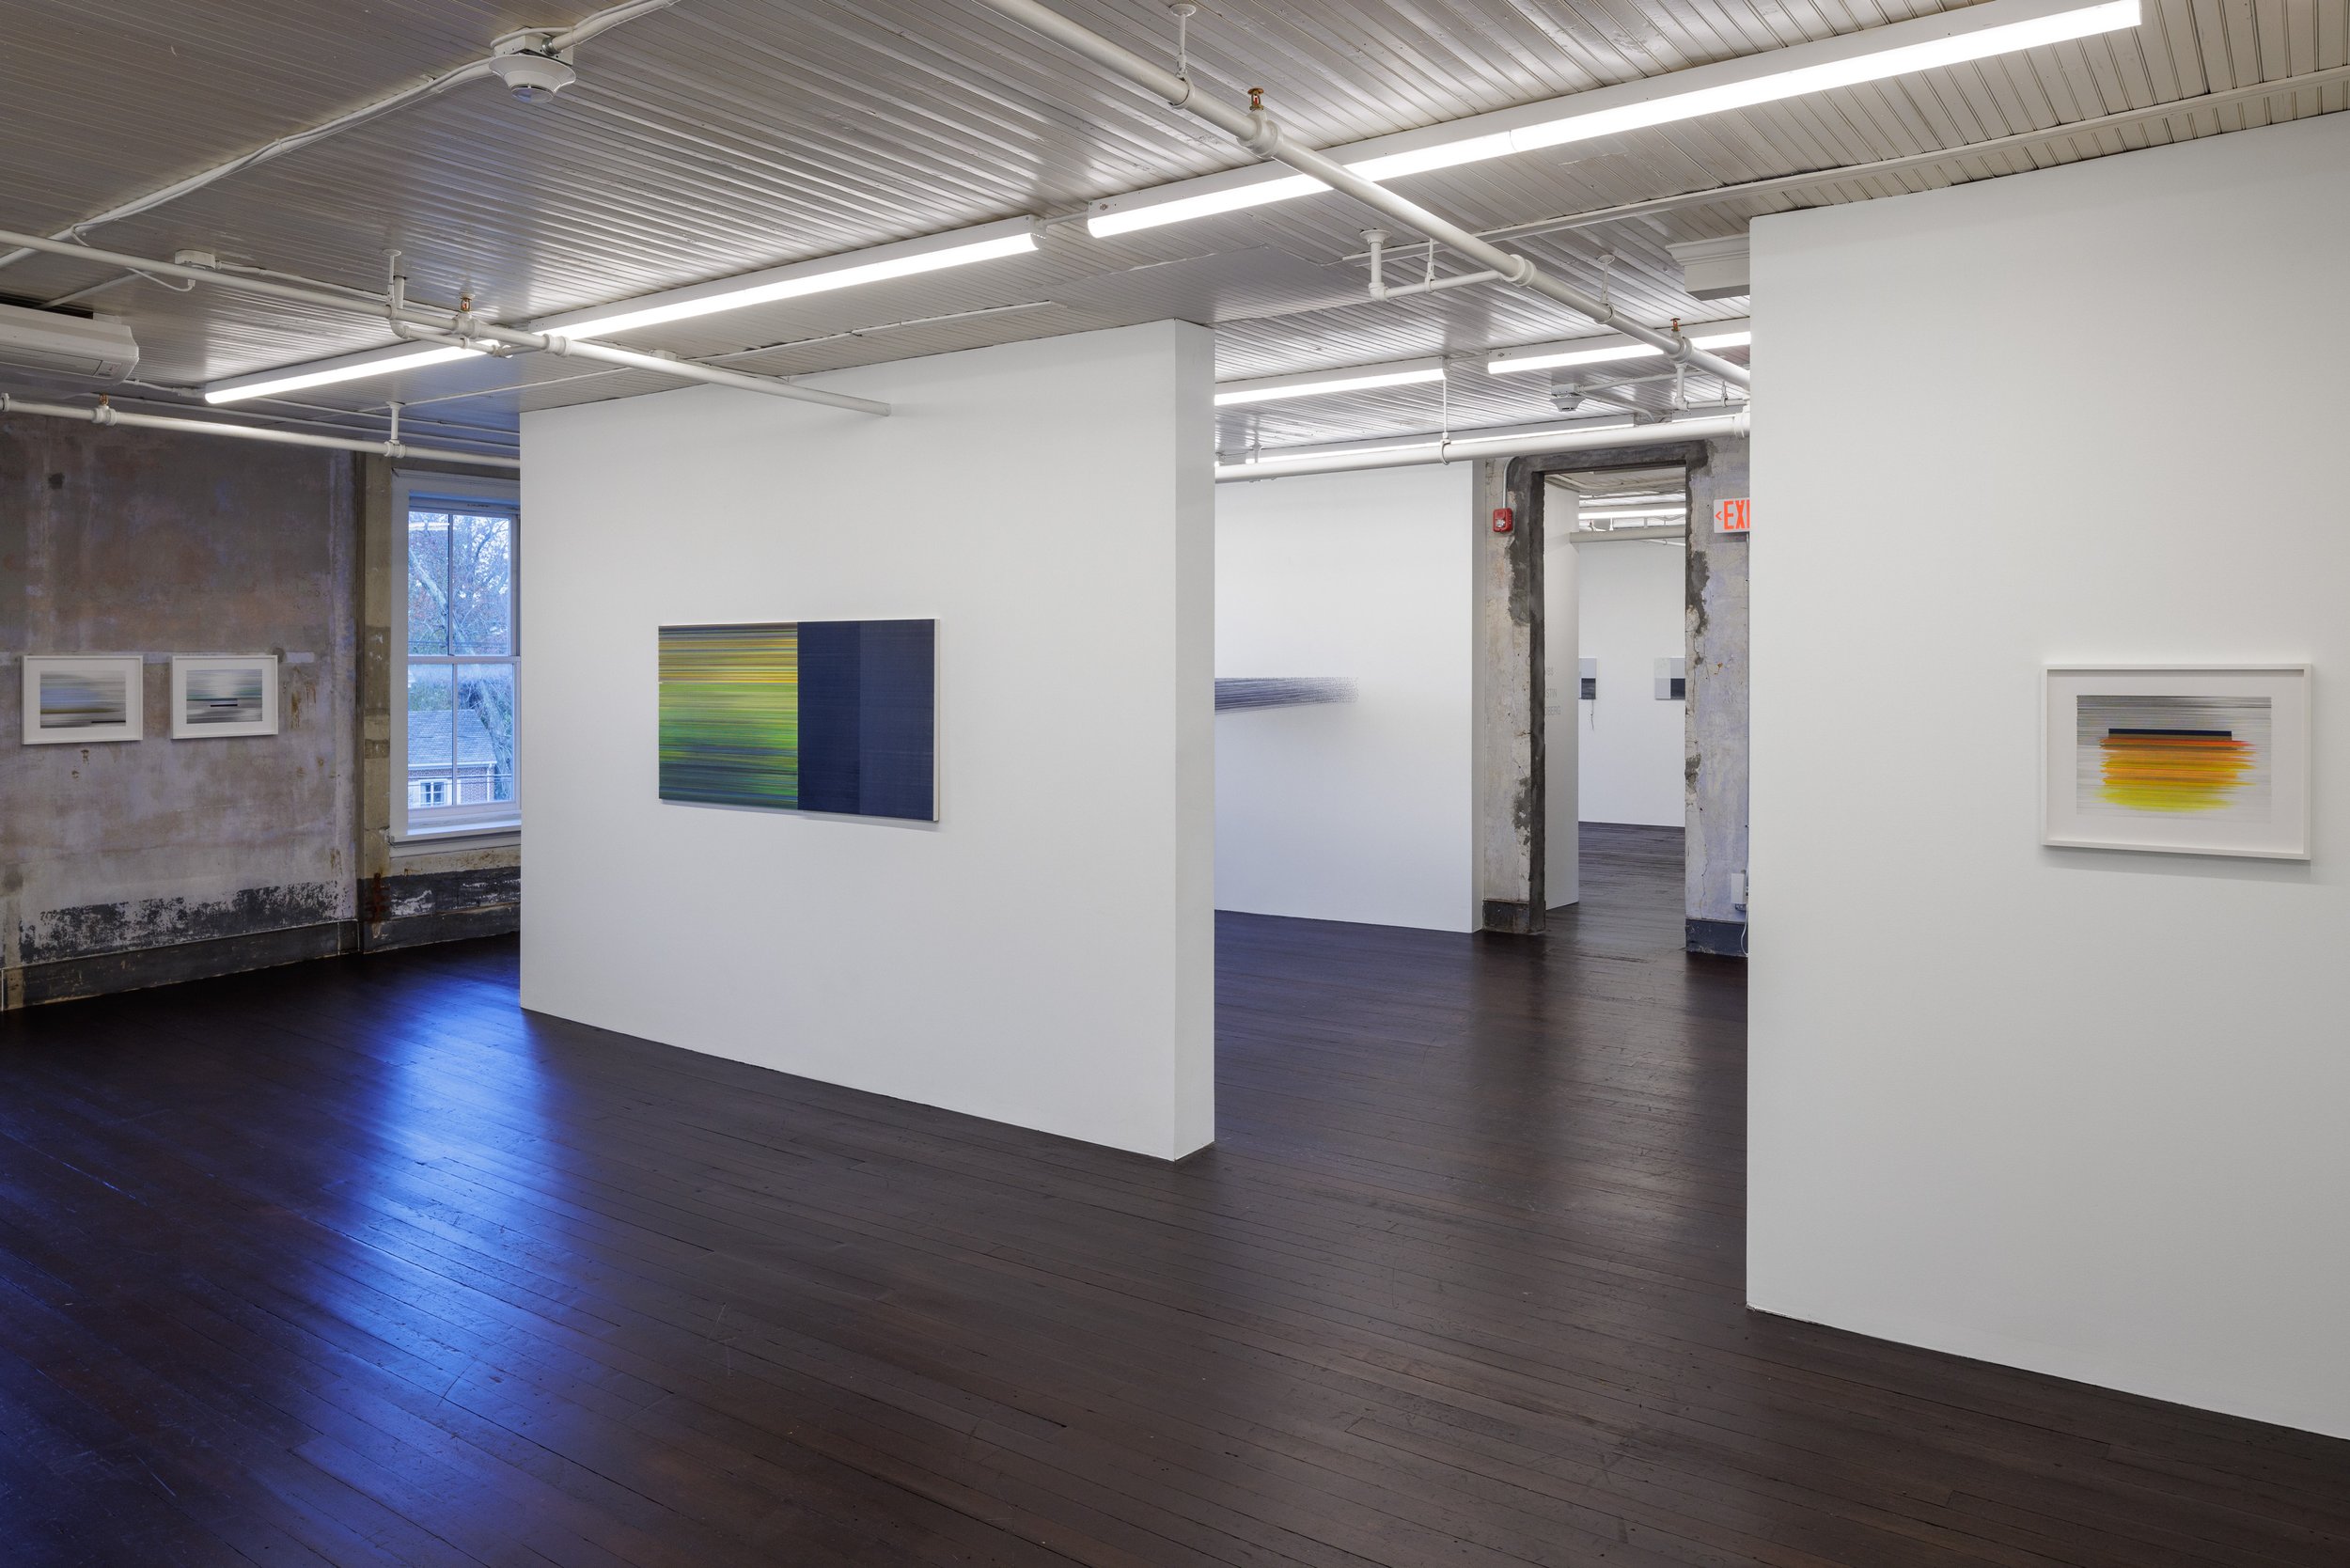  installation view photography by Alon Koppel 